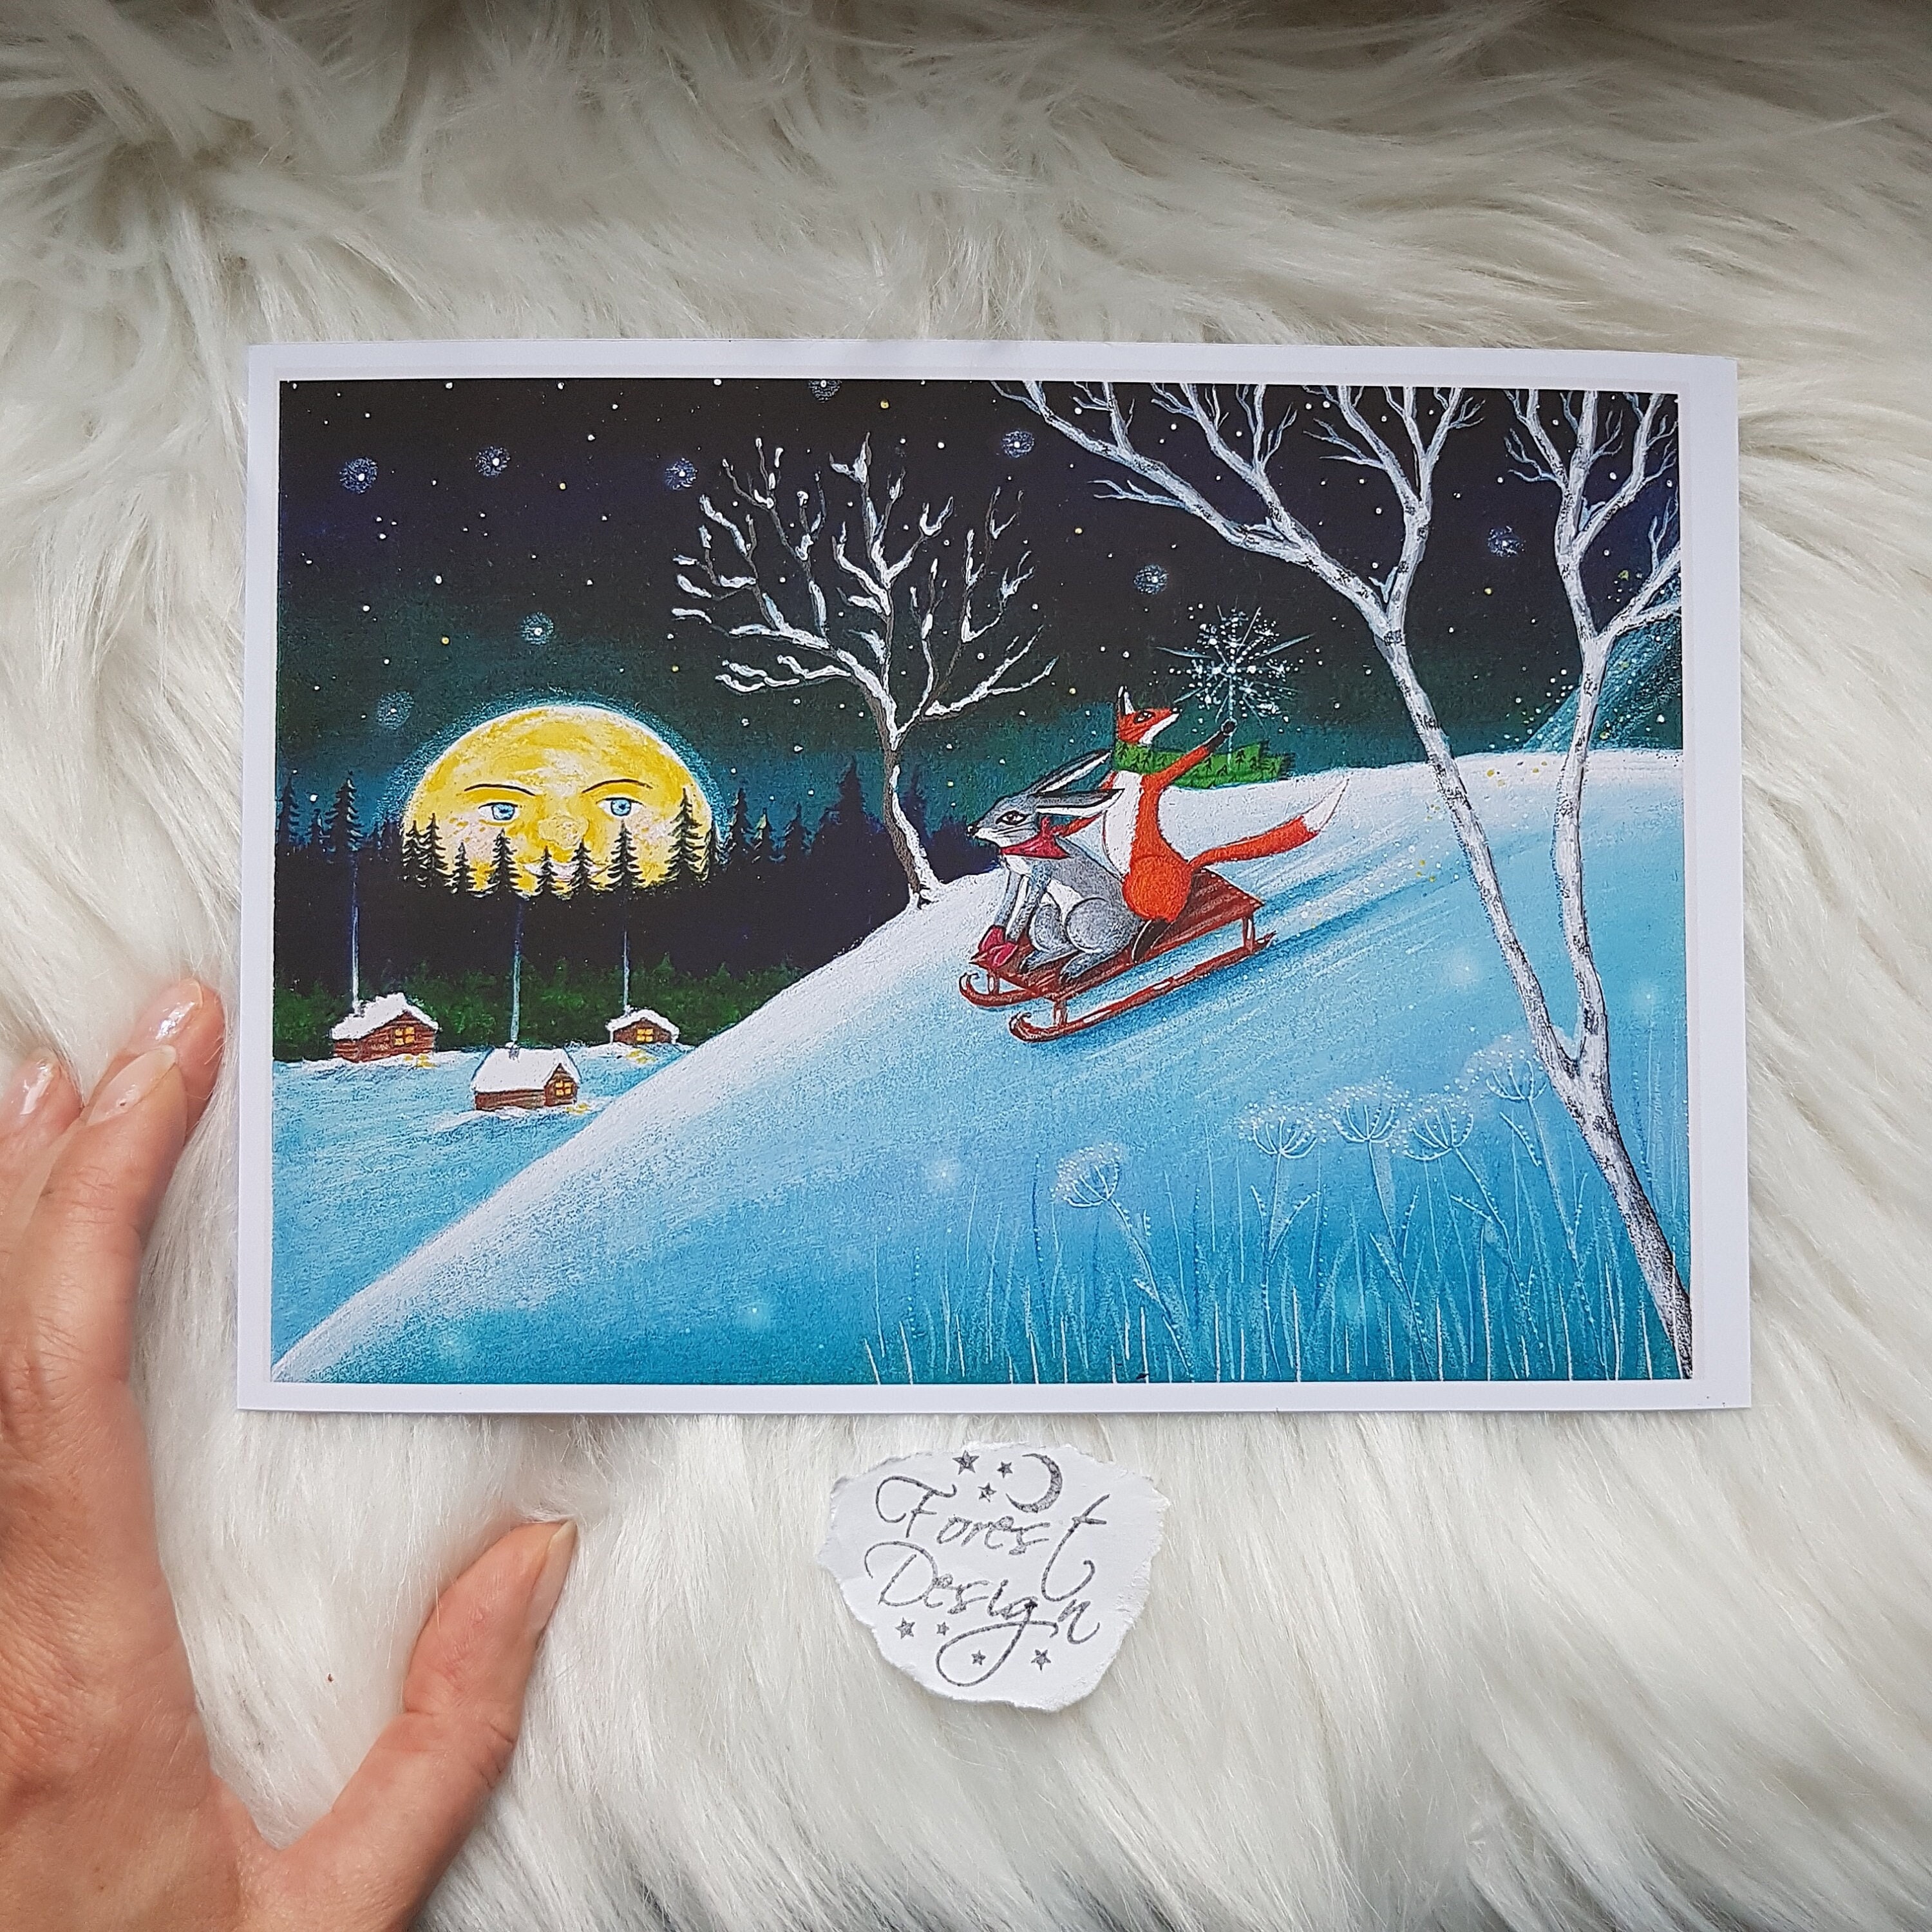 Scene - Sledge A4 A5 Cute Etsy Print Fun Fine Painting Animals Enchanted Art Snowy Winter Scenery/forest Tale February/whimsical Wall Decor/fairy